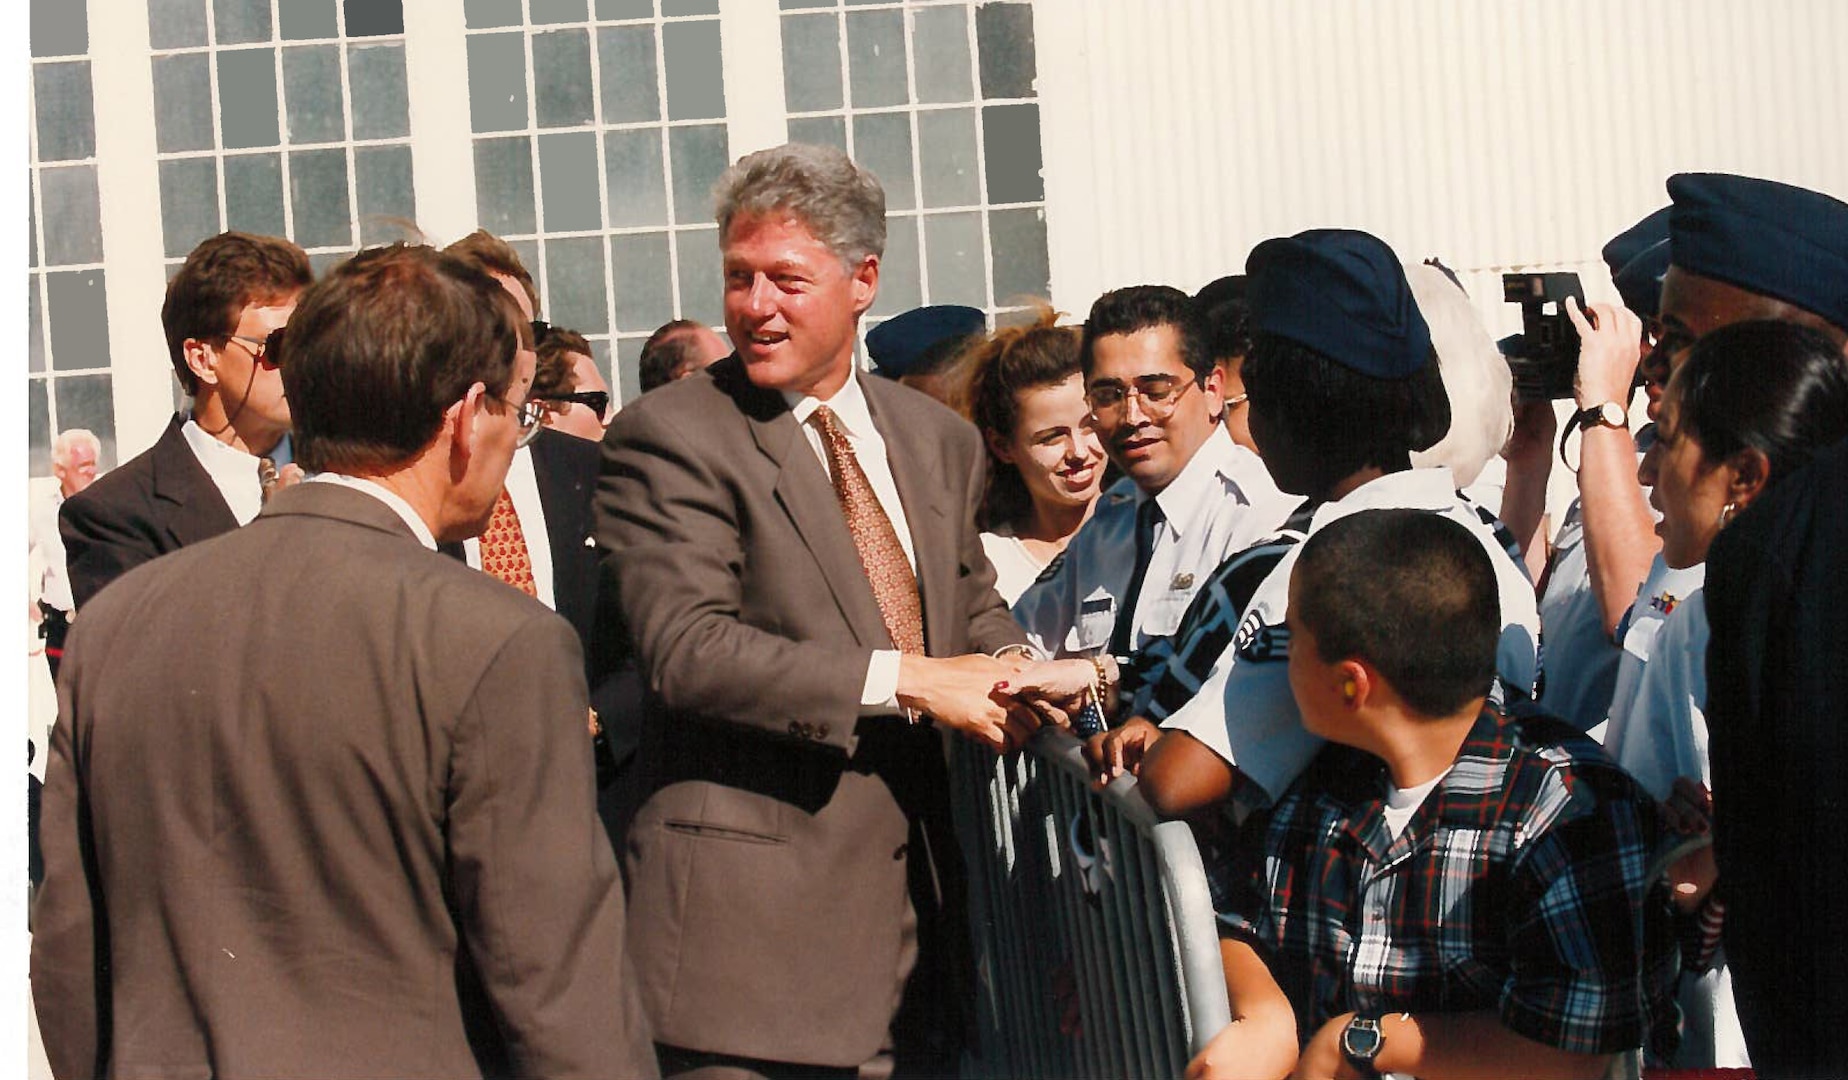 President Bill Clinton is greeted by onlookers after arriving at then-Kelly Air Force Base, San Antonio, Texas Oct. 17, 1995.